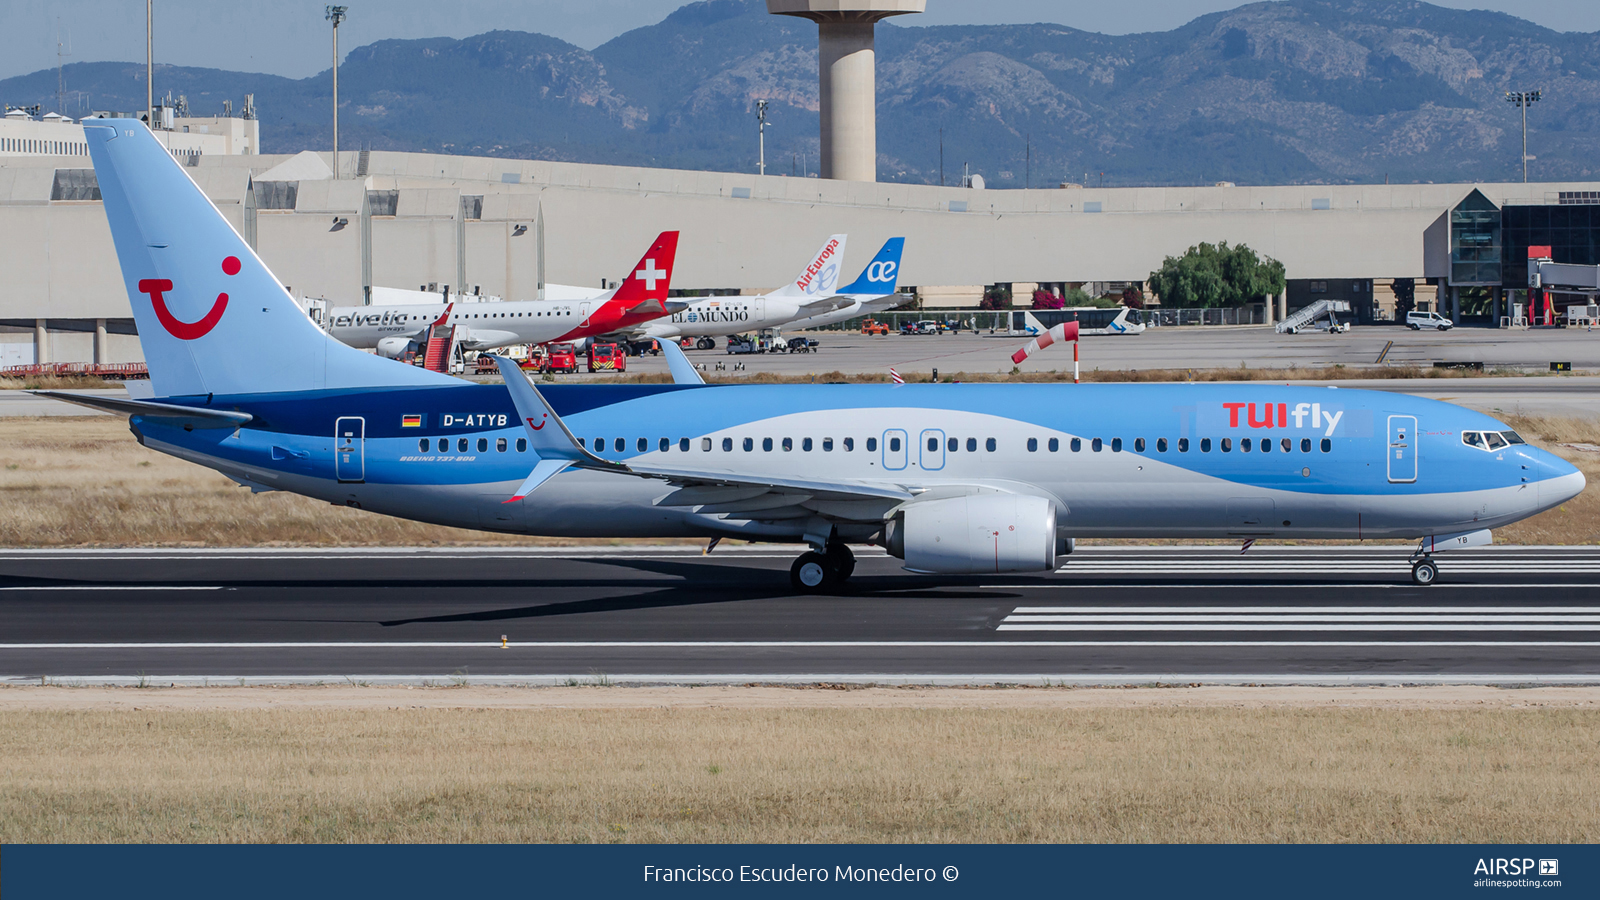 Tui Fly  Boeing 737-800  D-ATYB